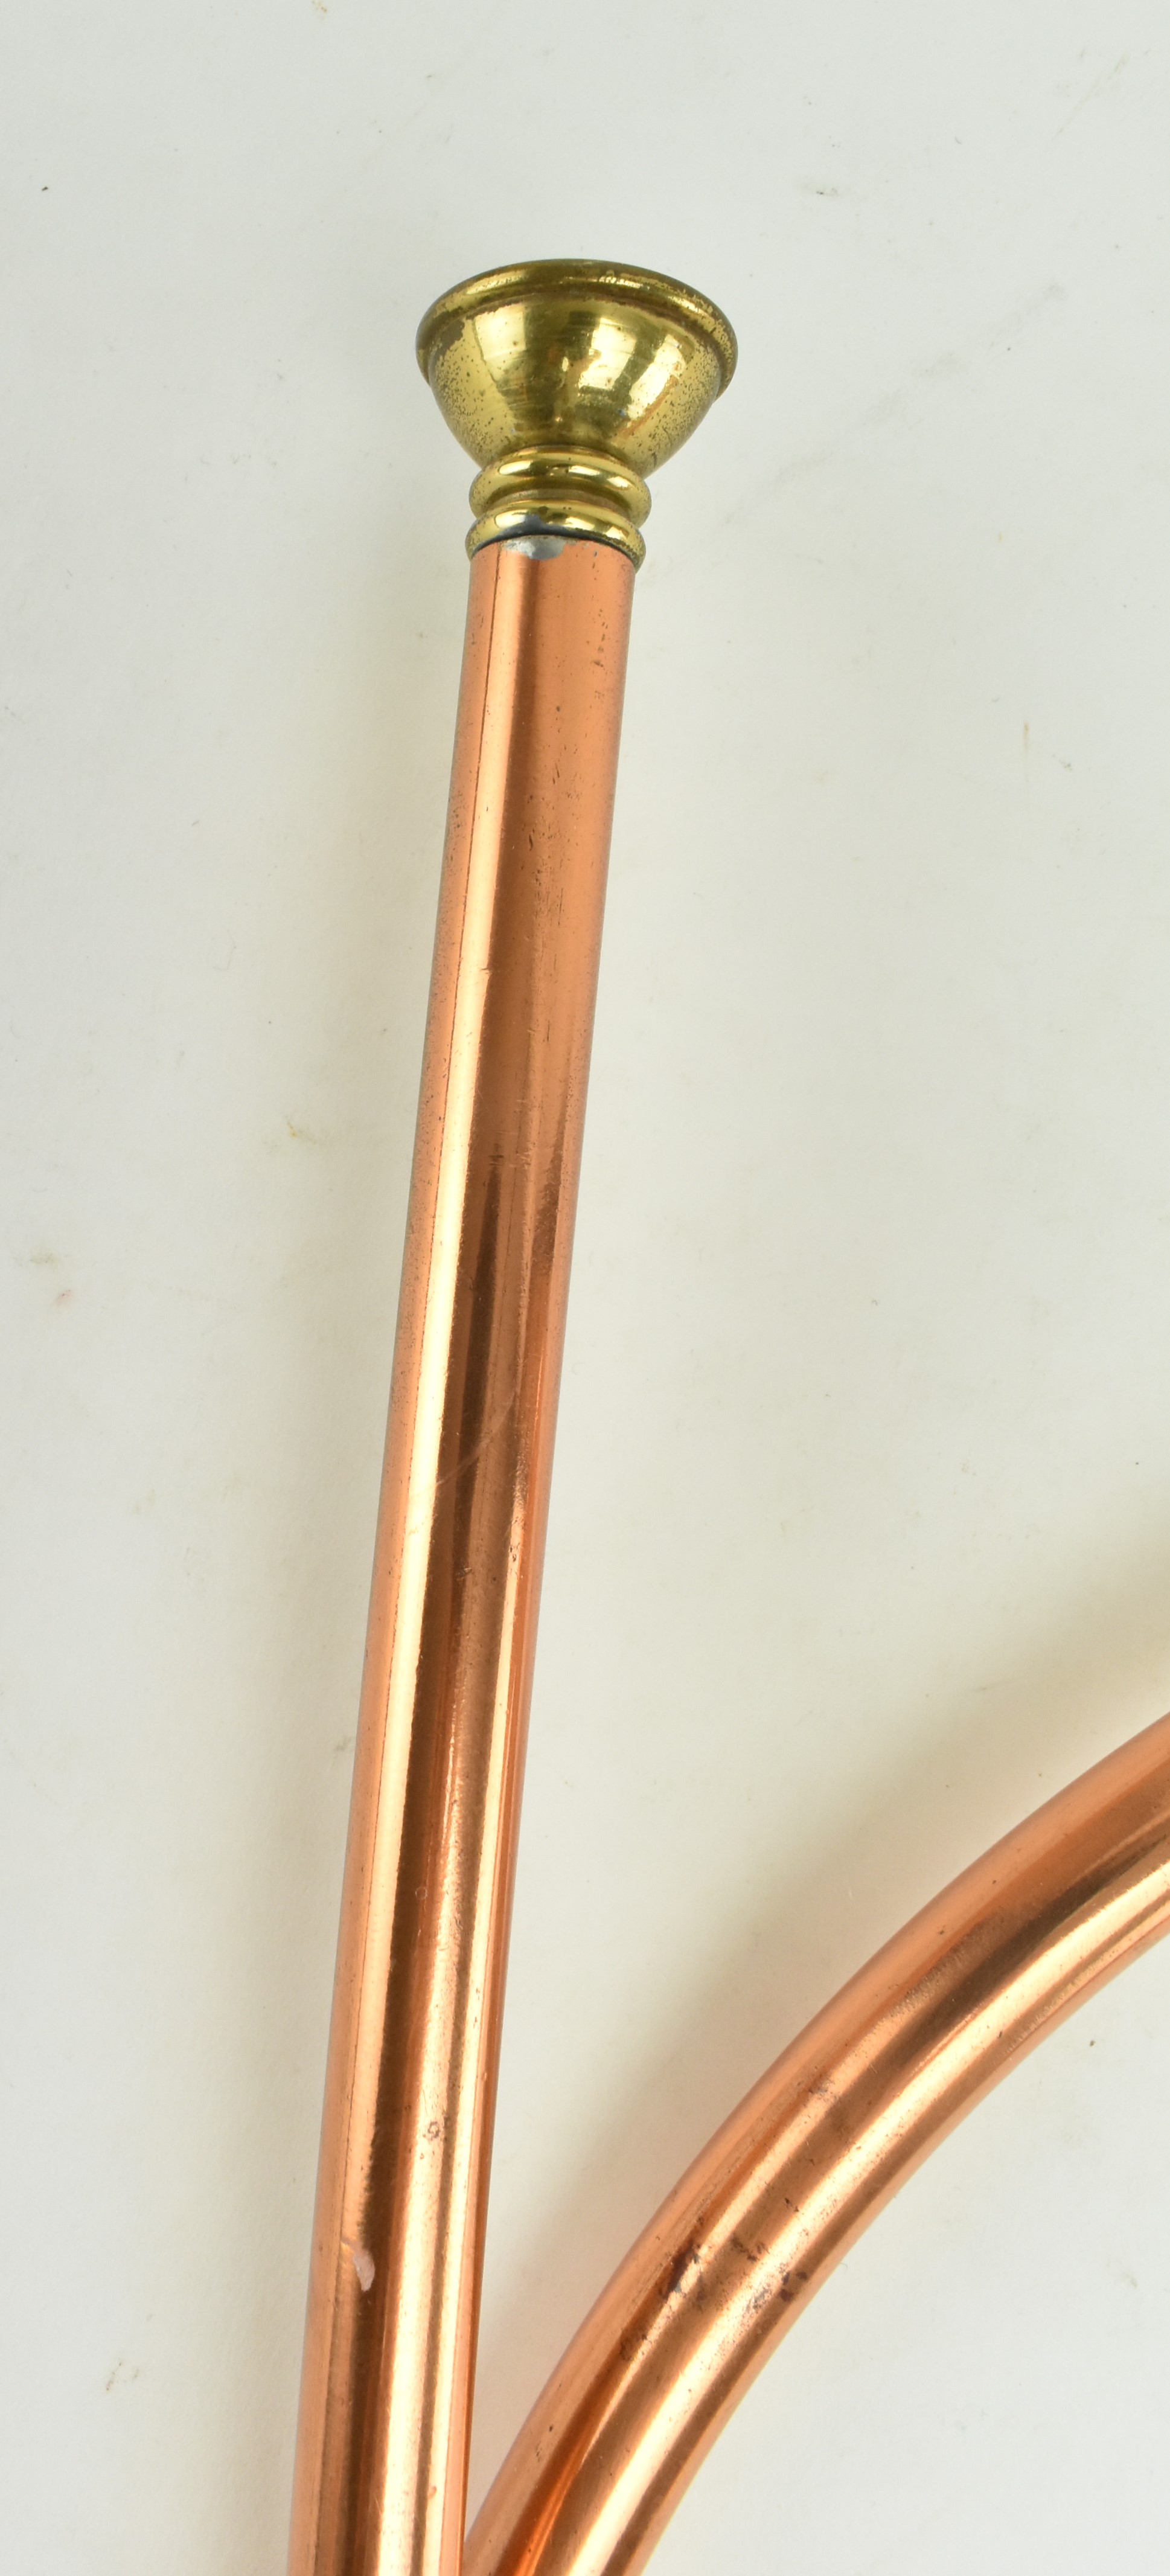 EARLY 20TH CENTURY COPPER & BRASS HUNTING HORN - Image 2 of 6